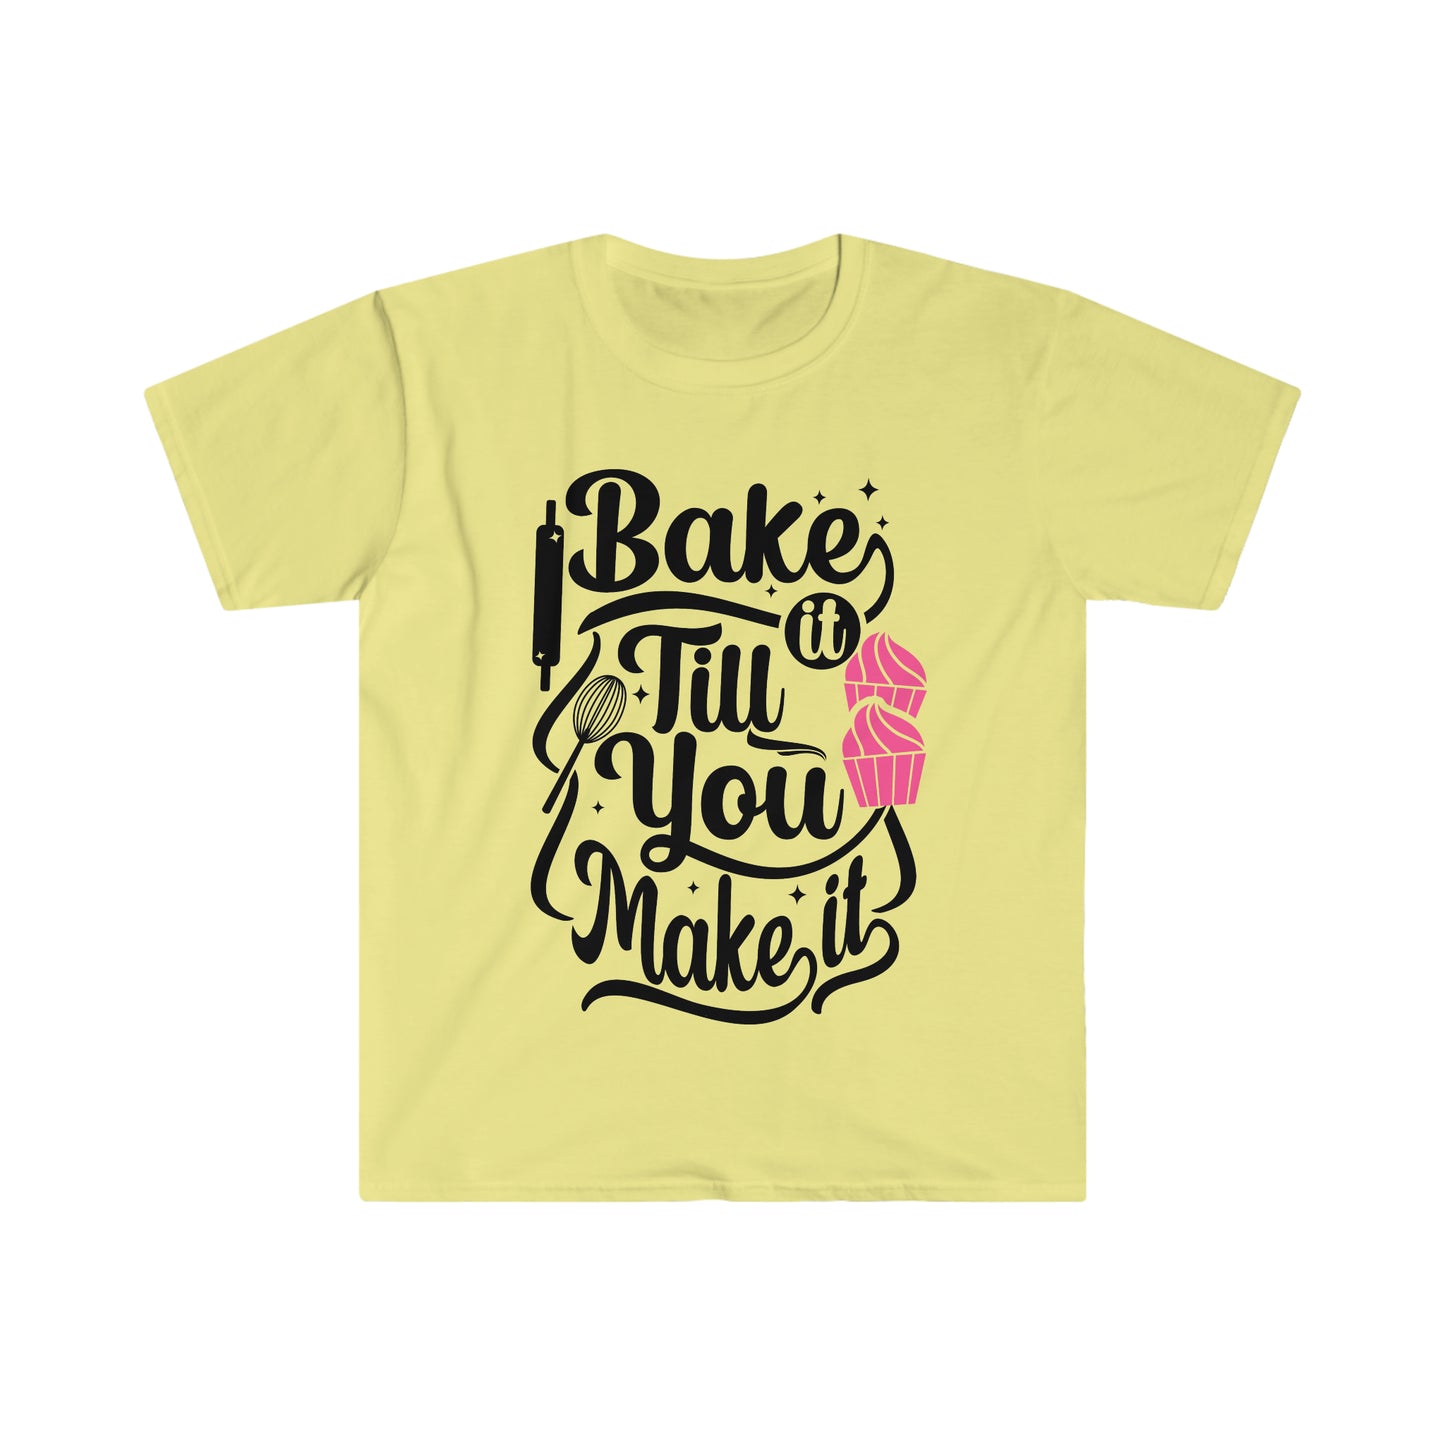 yellow cotton tee shirt for Bakers